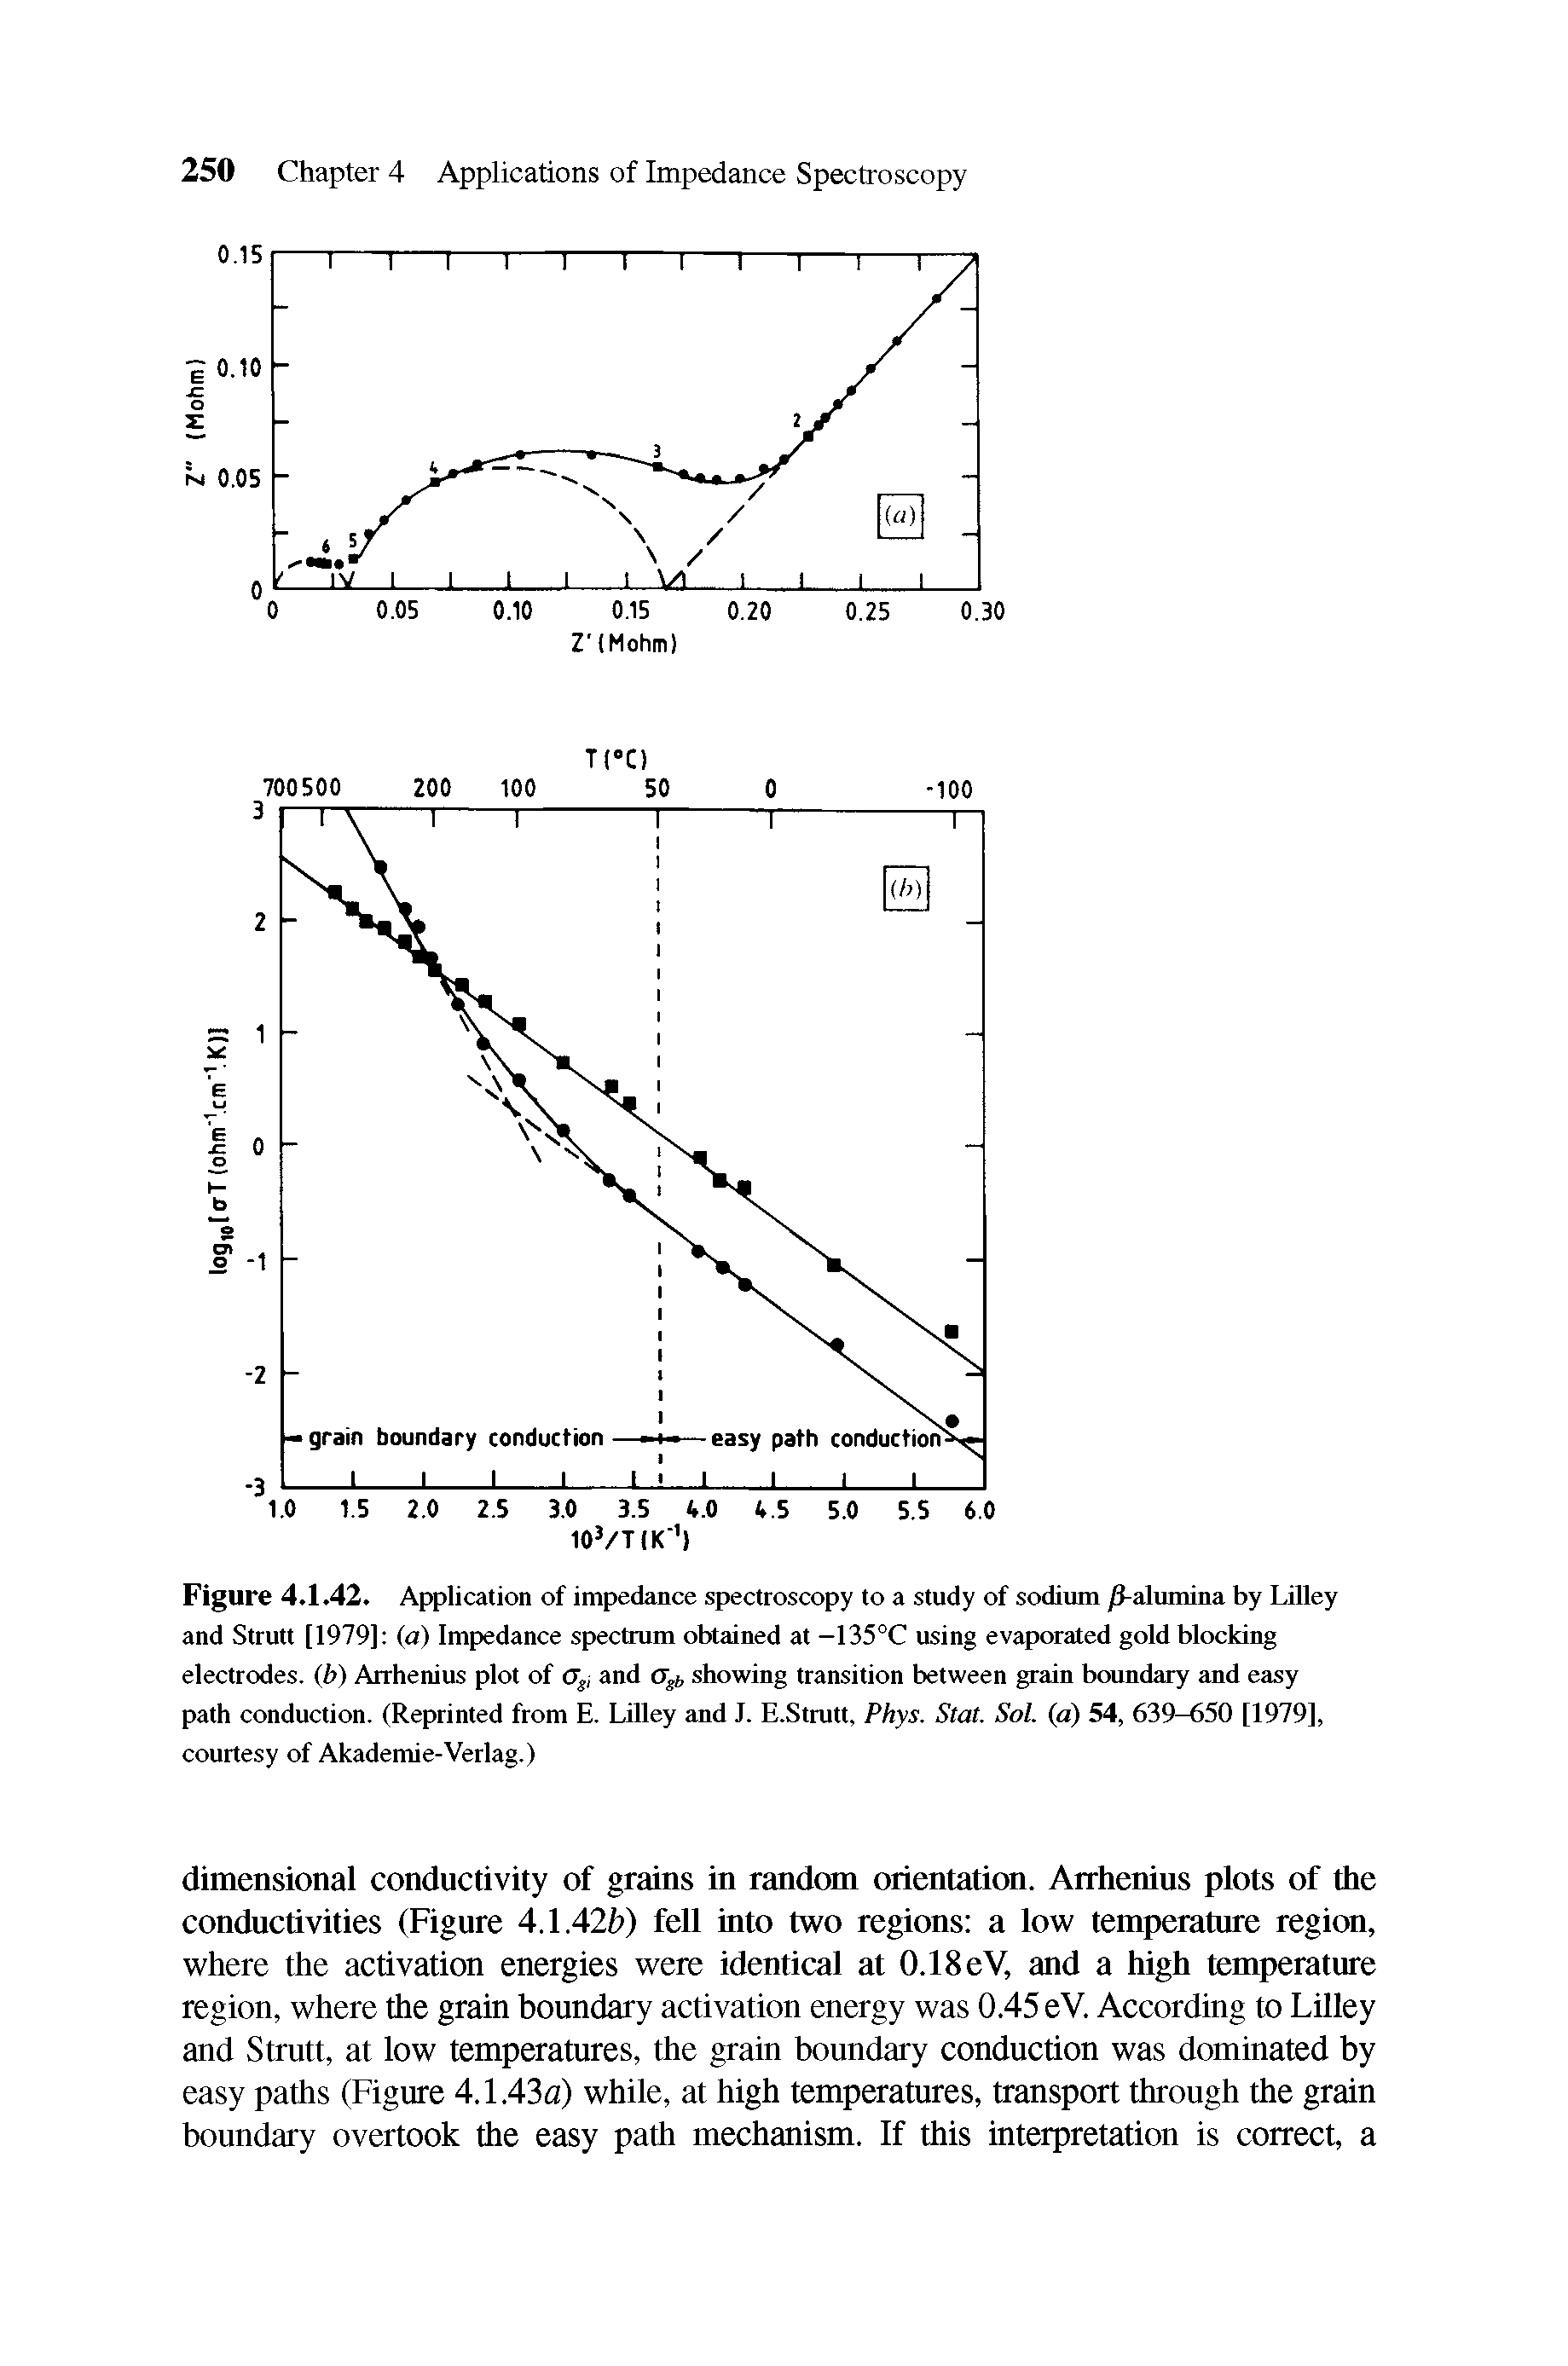 Figure 4.1.42. Application of impedance spectroscopy to a study of sodium )3-alumina by T.illey and Strutt [1979] (<i) Impedance spectrum obtained at —135°C using evaporated gold blocldng electrodes, (b) Arrhenius plot of tr j and showing transition between grain boundary and easy path conduction. (Reprinted from E. Lflley and J. E.Strutt, Phys. Stat. Sol. (a) 54, 639-650 [1979], courtesy of Akademie-Verlag.)...